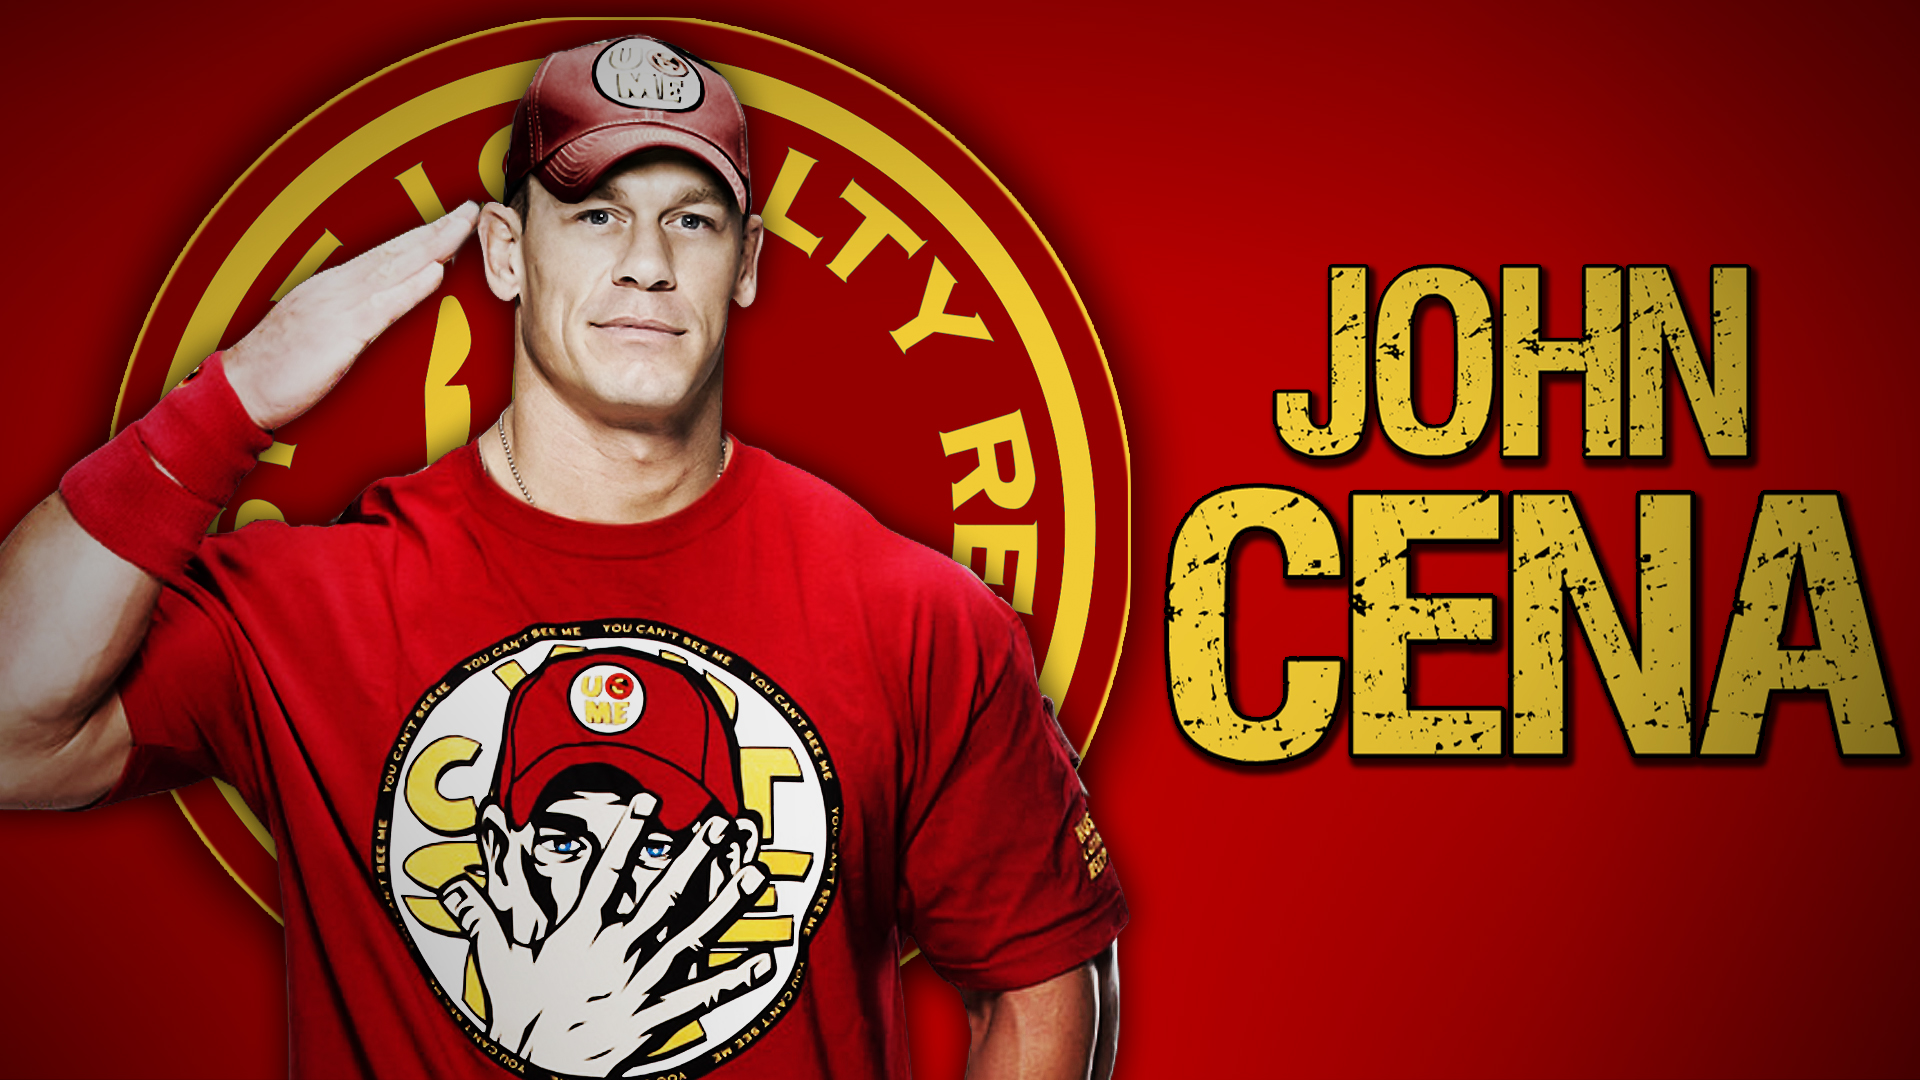 John Cena Wallpapers Pictures Images